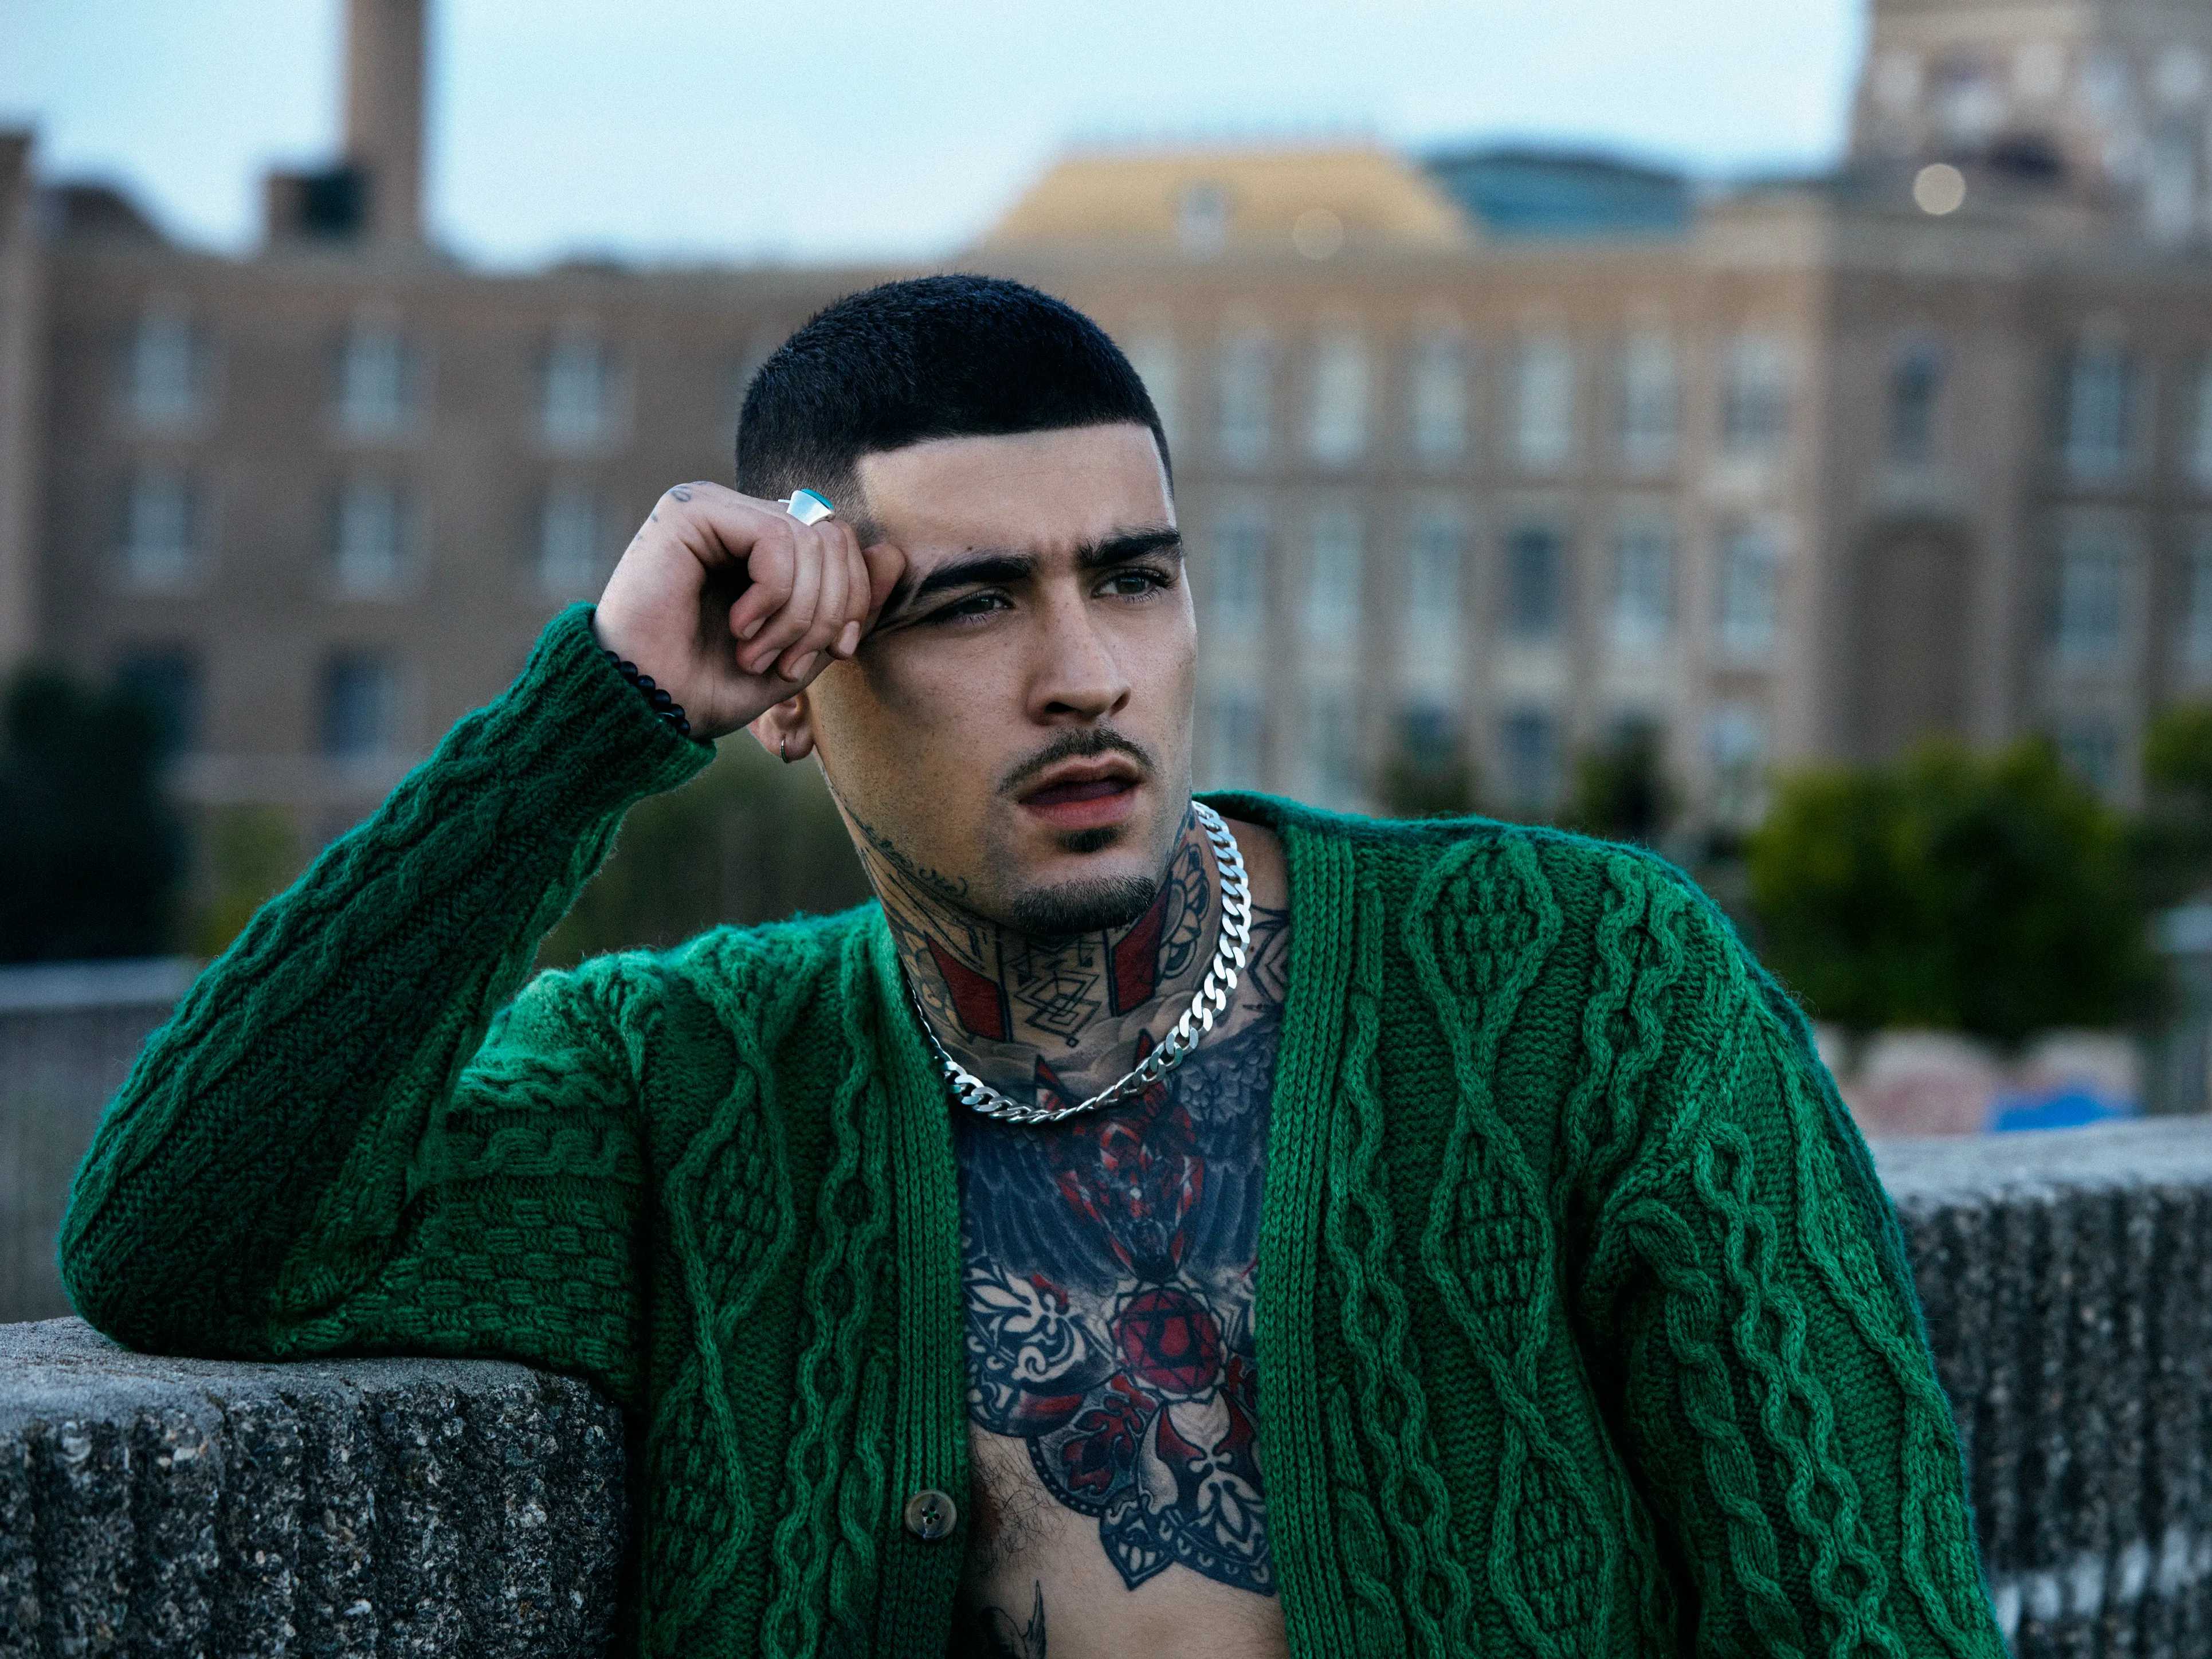 All you need to know about Zayn Malik's life, career, net worth and more